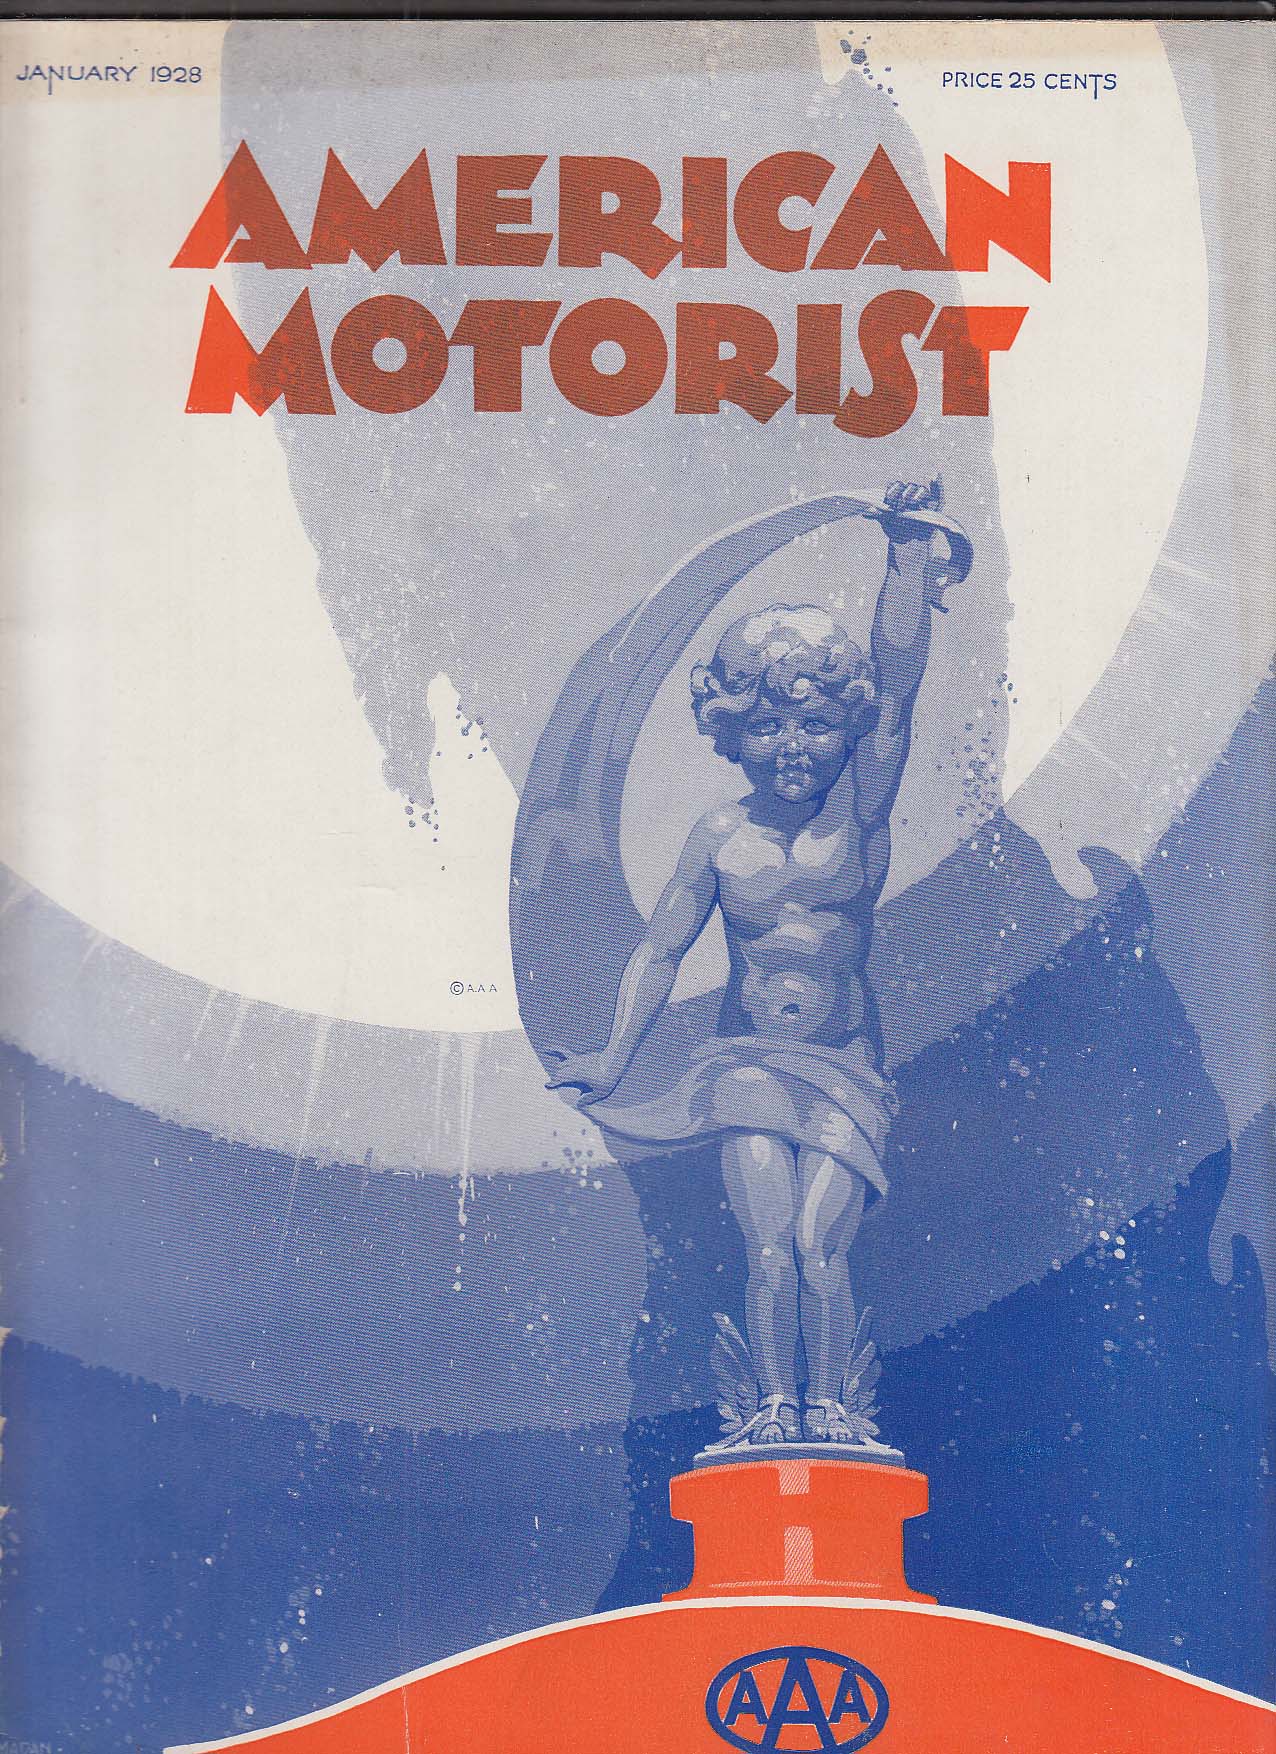 AMERICAN MOTORIST Frontwheel Drive Mary Eaton Jack Welch Ford Cadillac